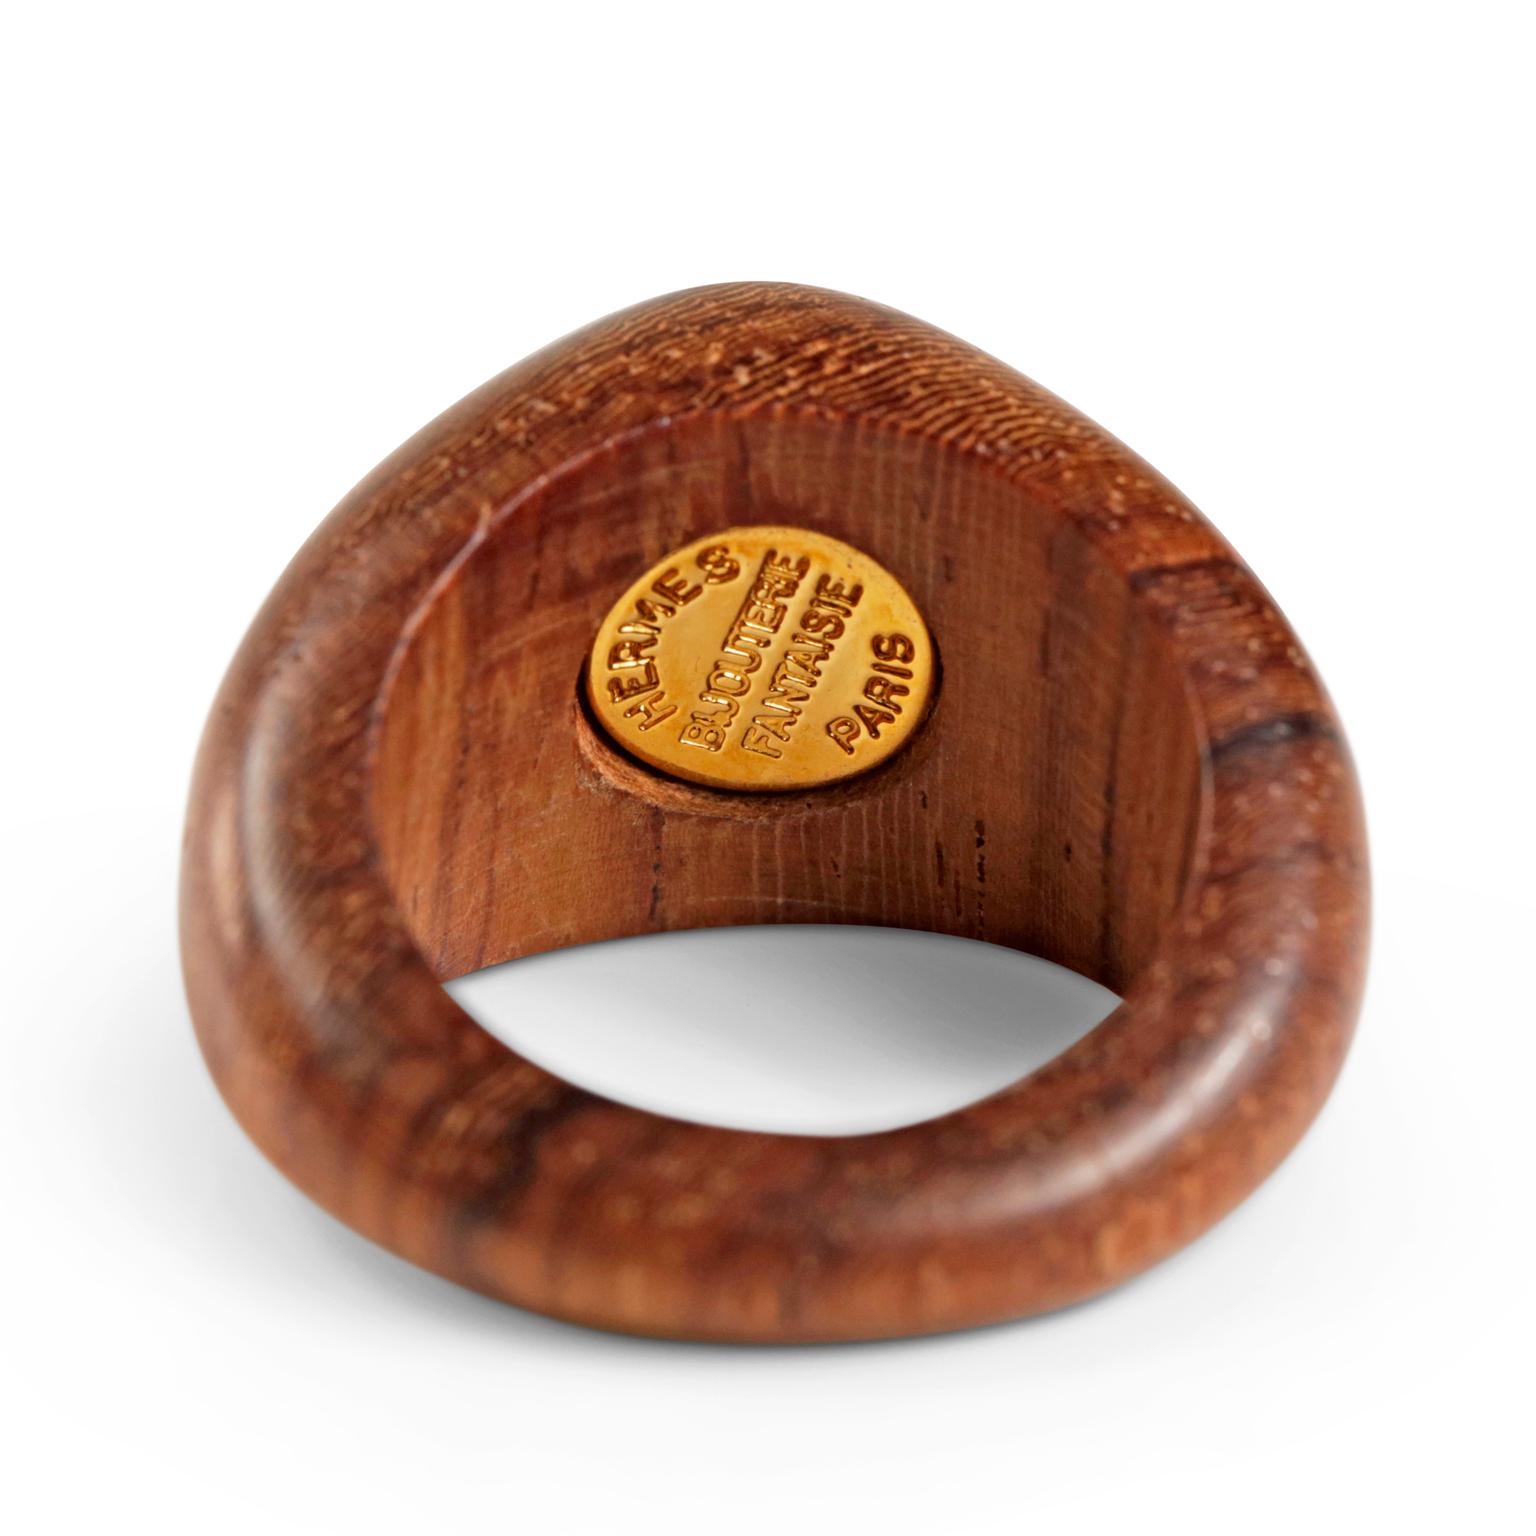 Hermès Wood and Gold Ring- Mint Condition
 18 karat stamped signet on wood ring.  Size 5.  Made in France.
